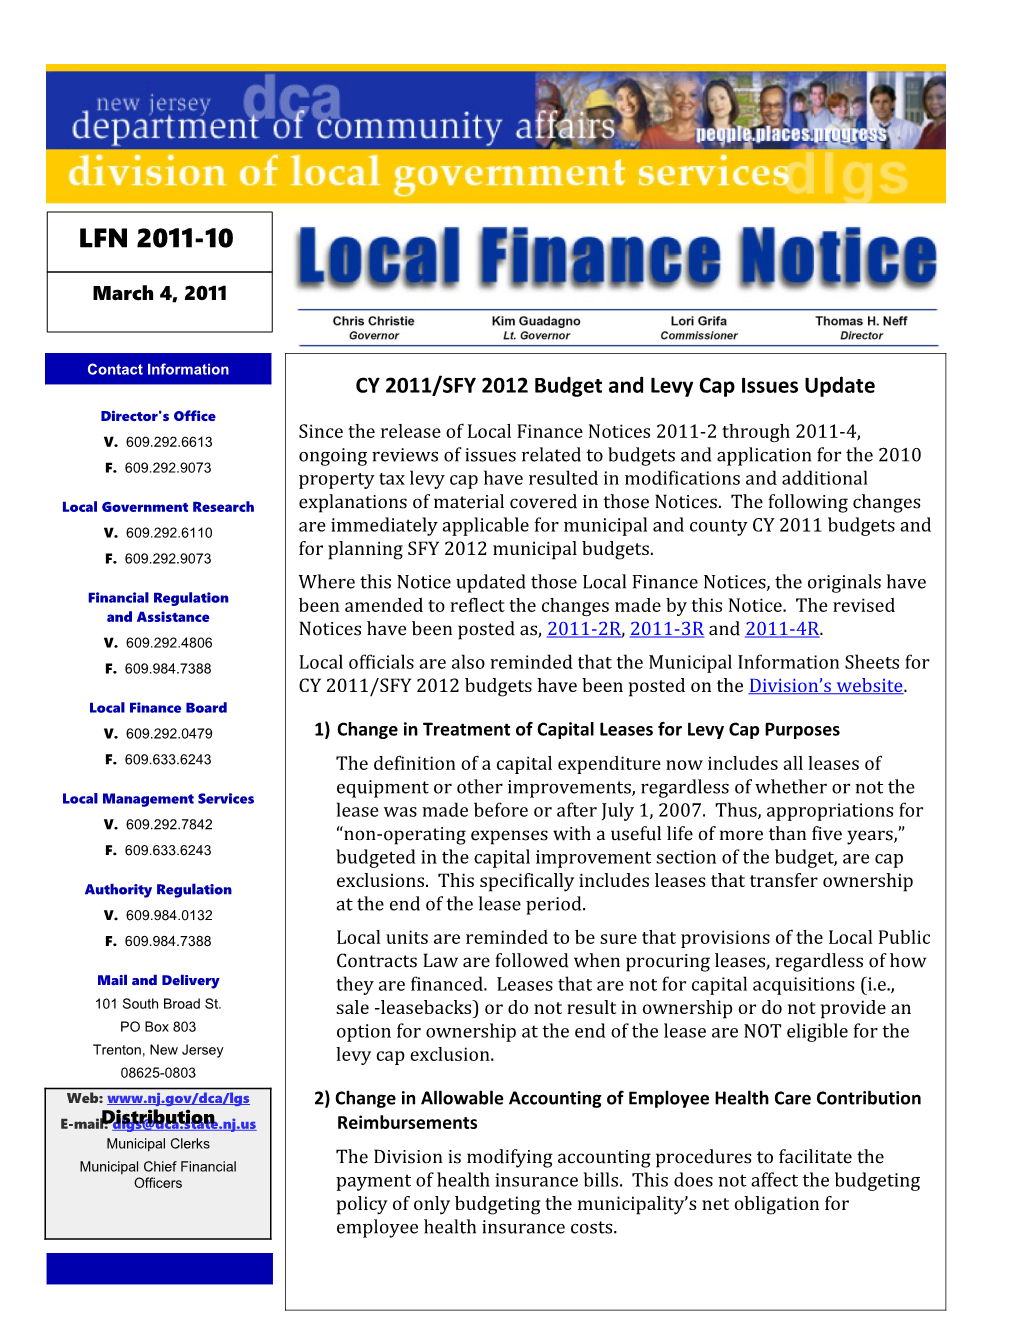 Local Finance Notice 2011-10March 4, 2011Page 1